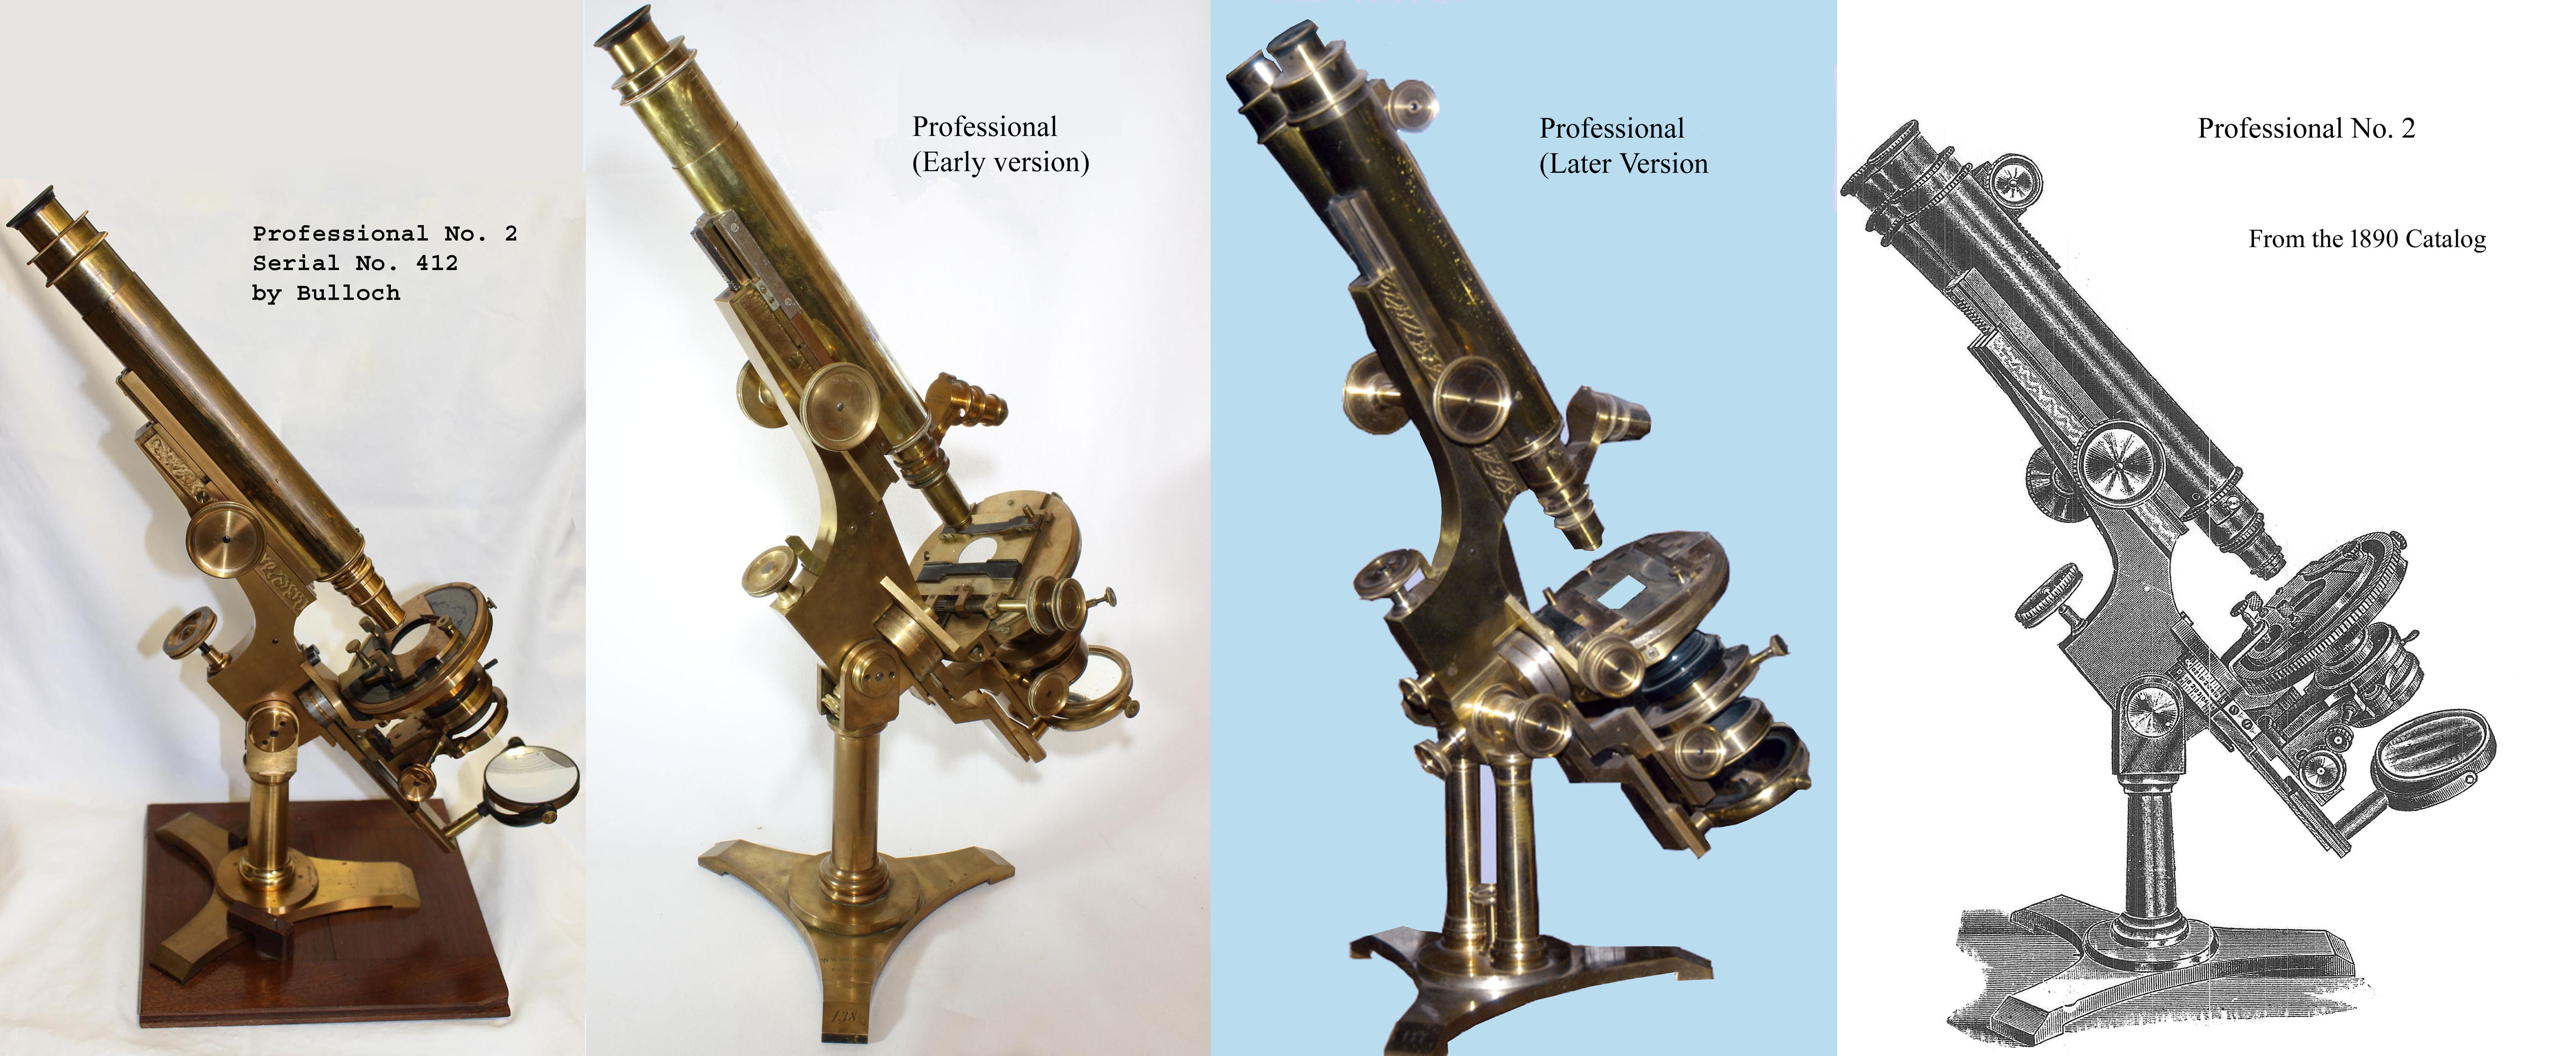 4 images of the bulloch professional microscopes